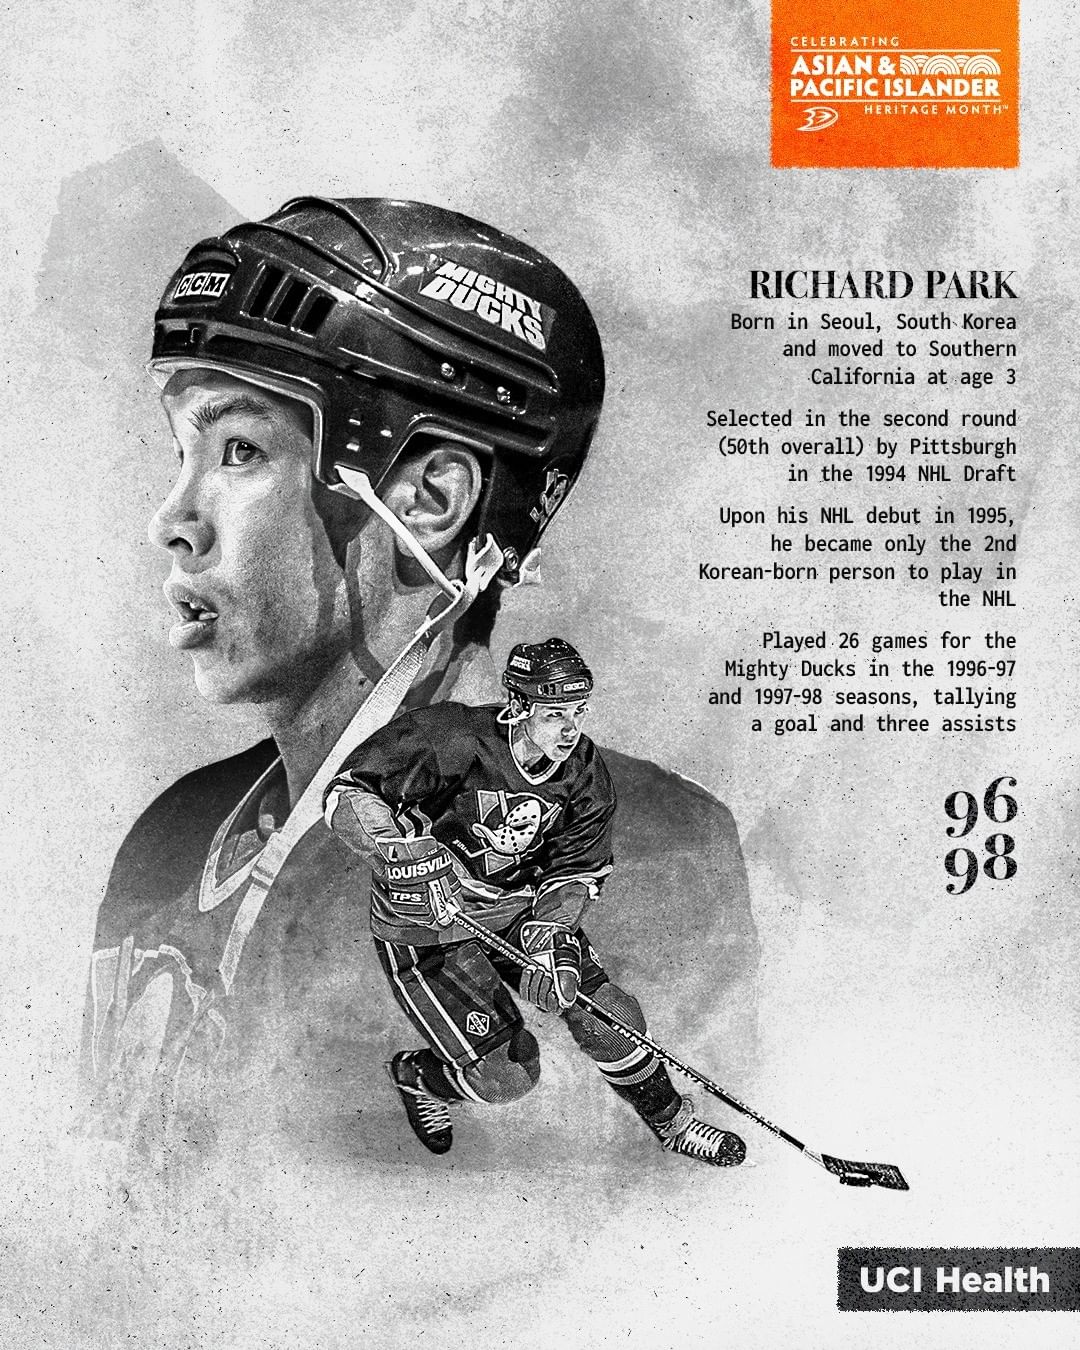 Honoring those who make our game special. Richard Park played in 14 NHL seasons ...